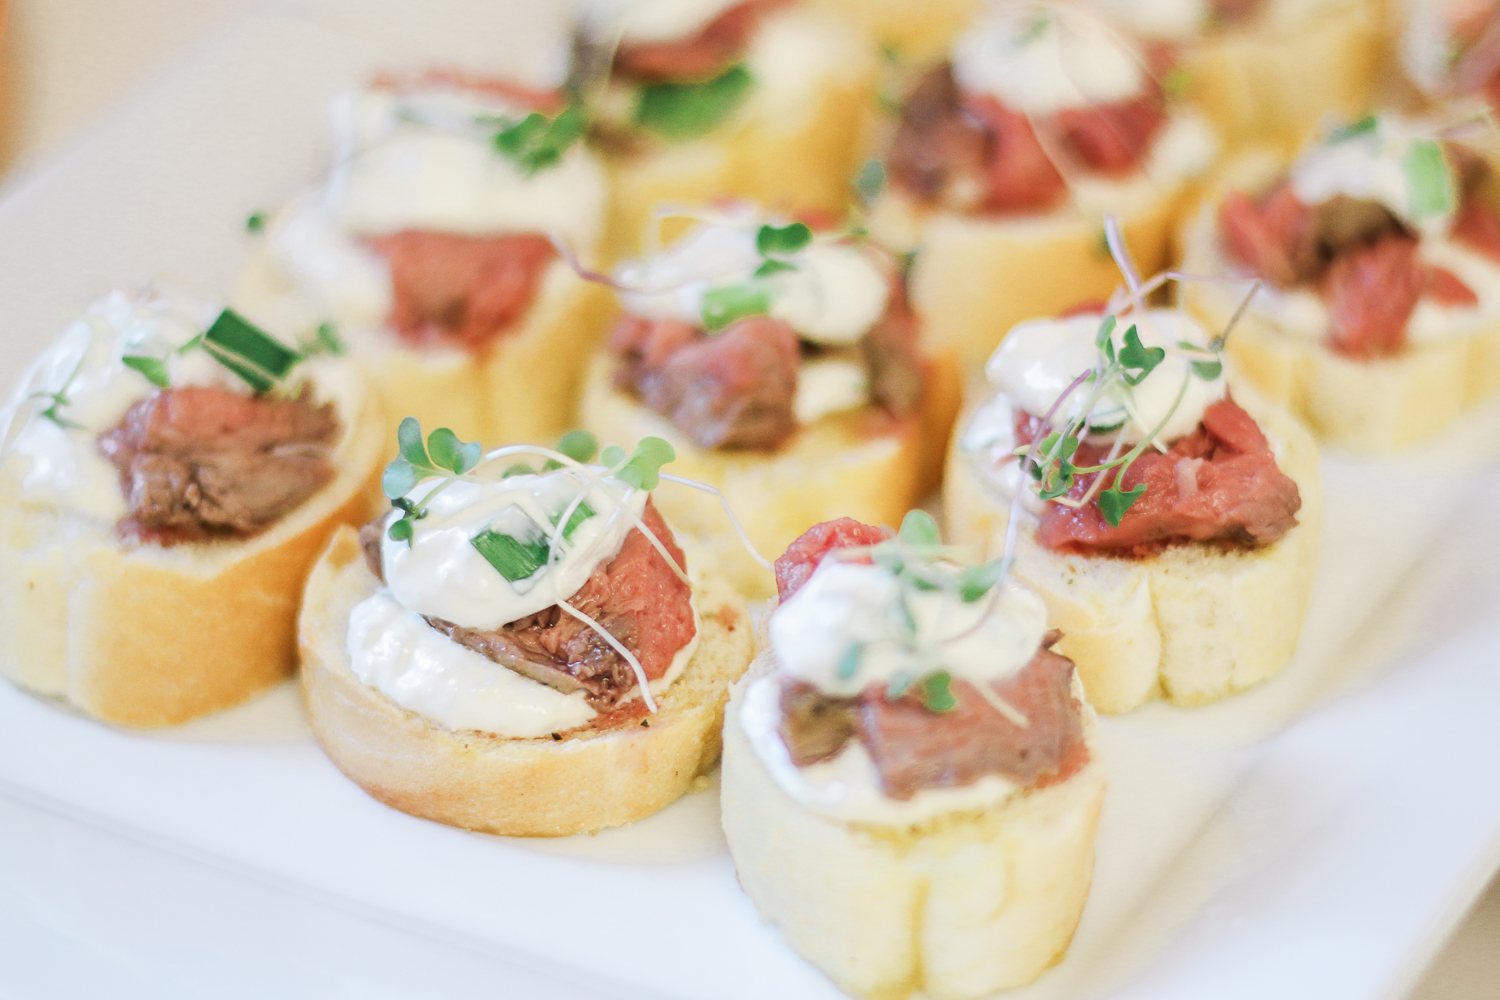 One of the best beef crostini appetizers created by blogger Stephanie Ziajka on Diary of a Debutante